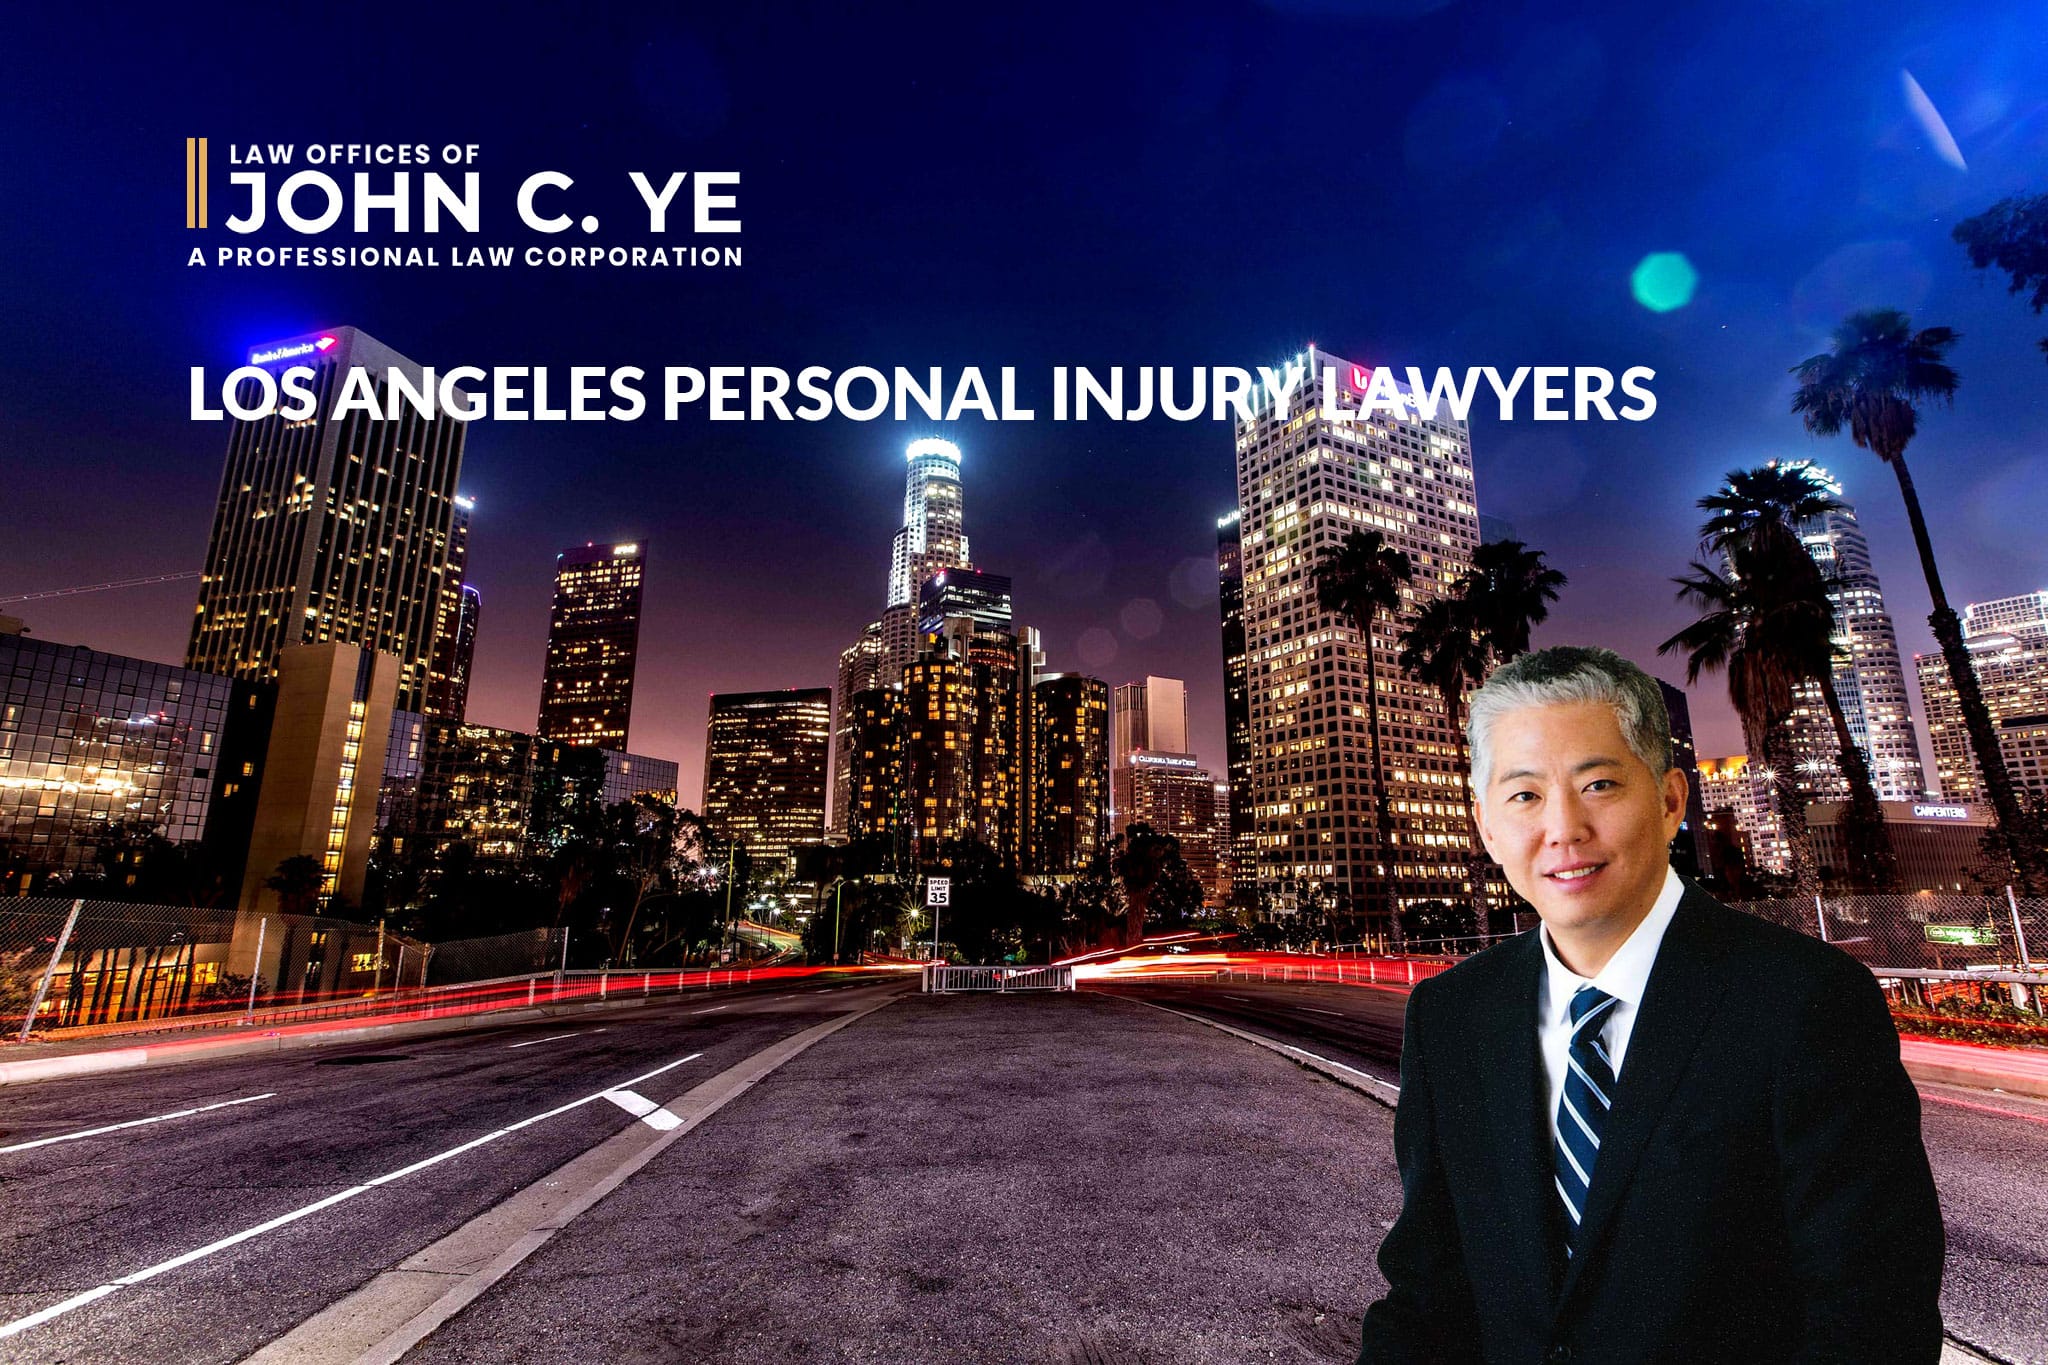 Law Offices of John C. Ye - Los Angeles, CA, US, lawyers personal injury